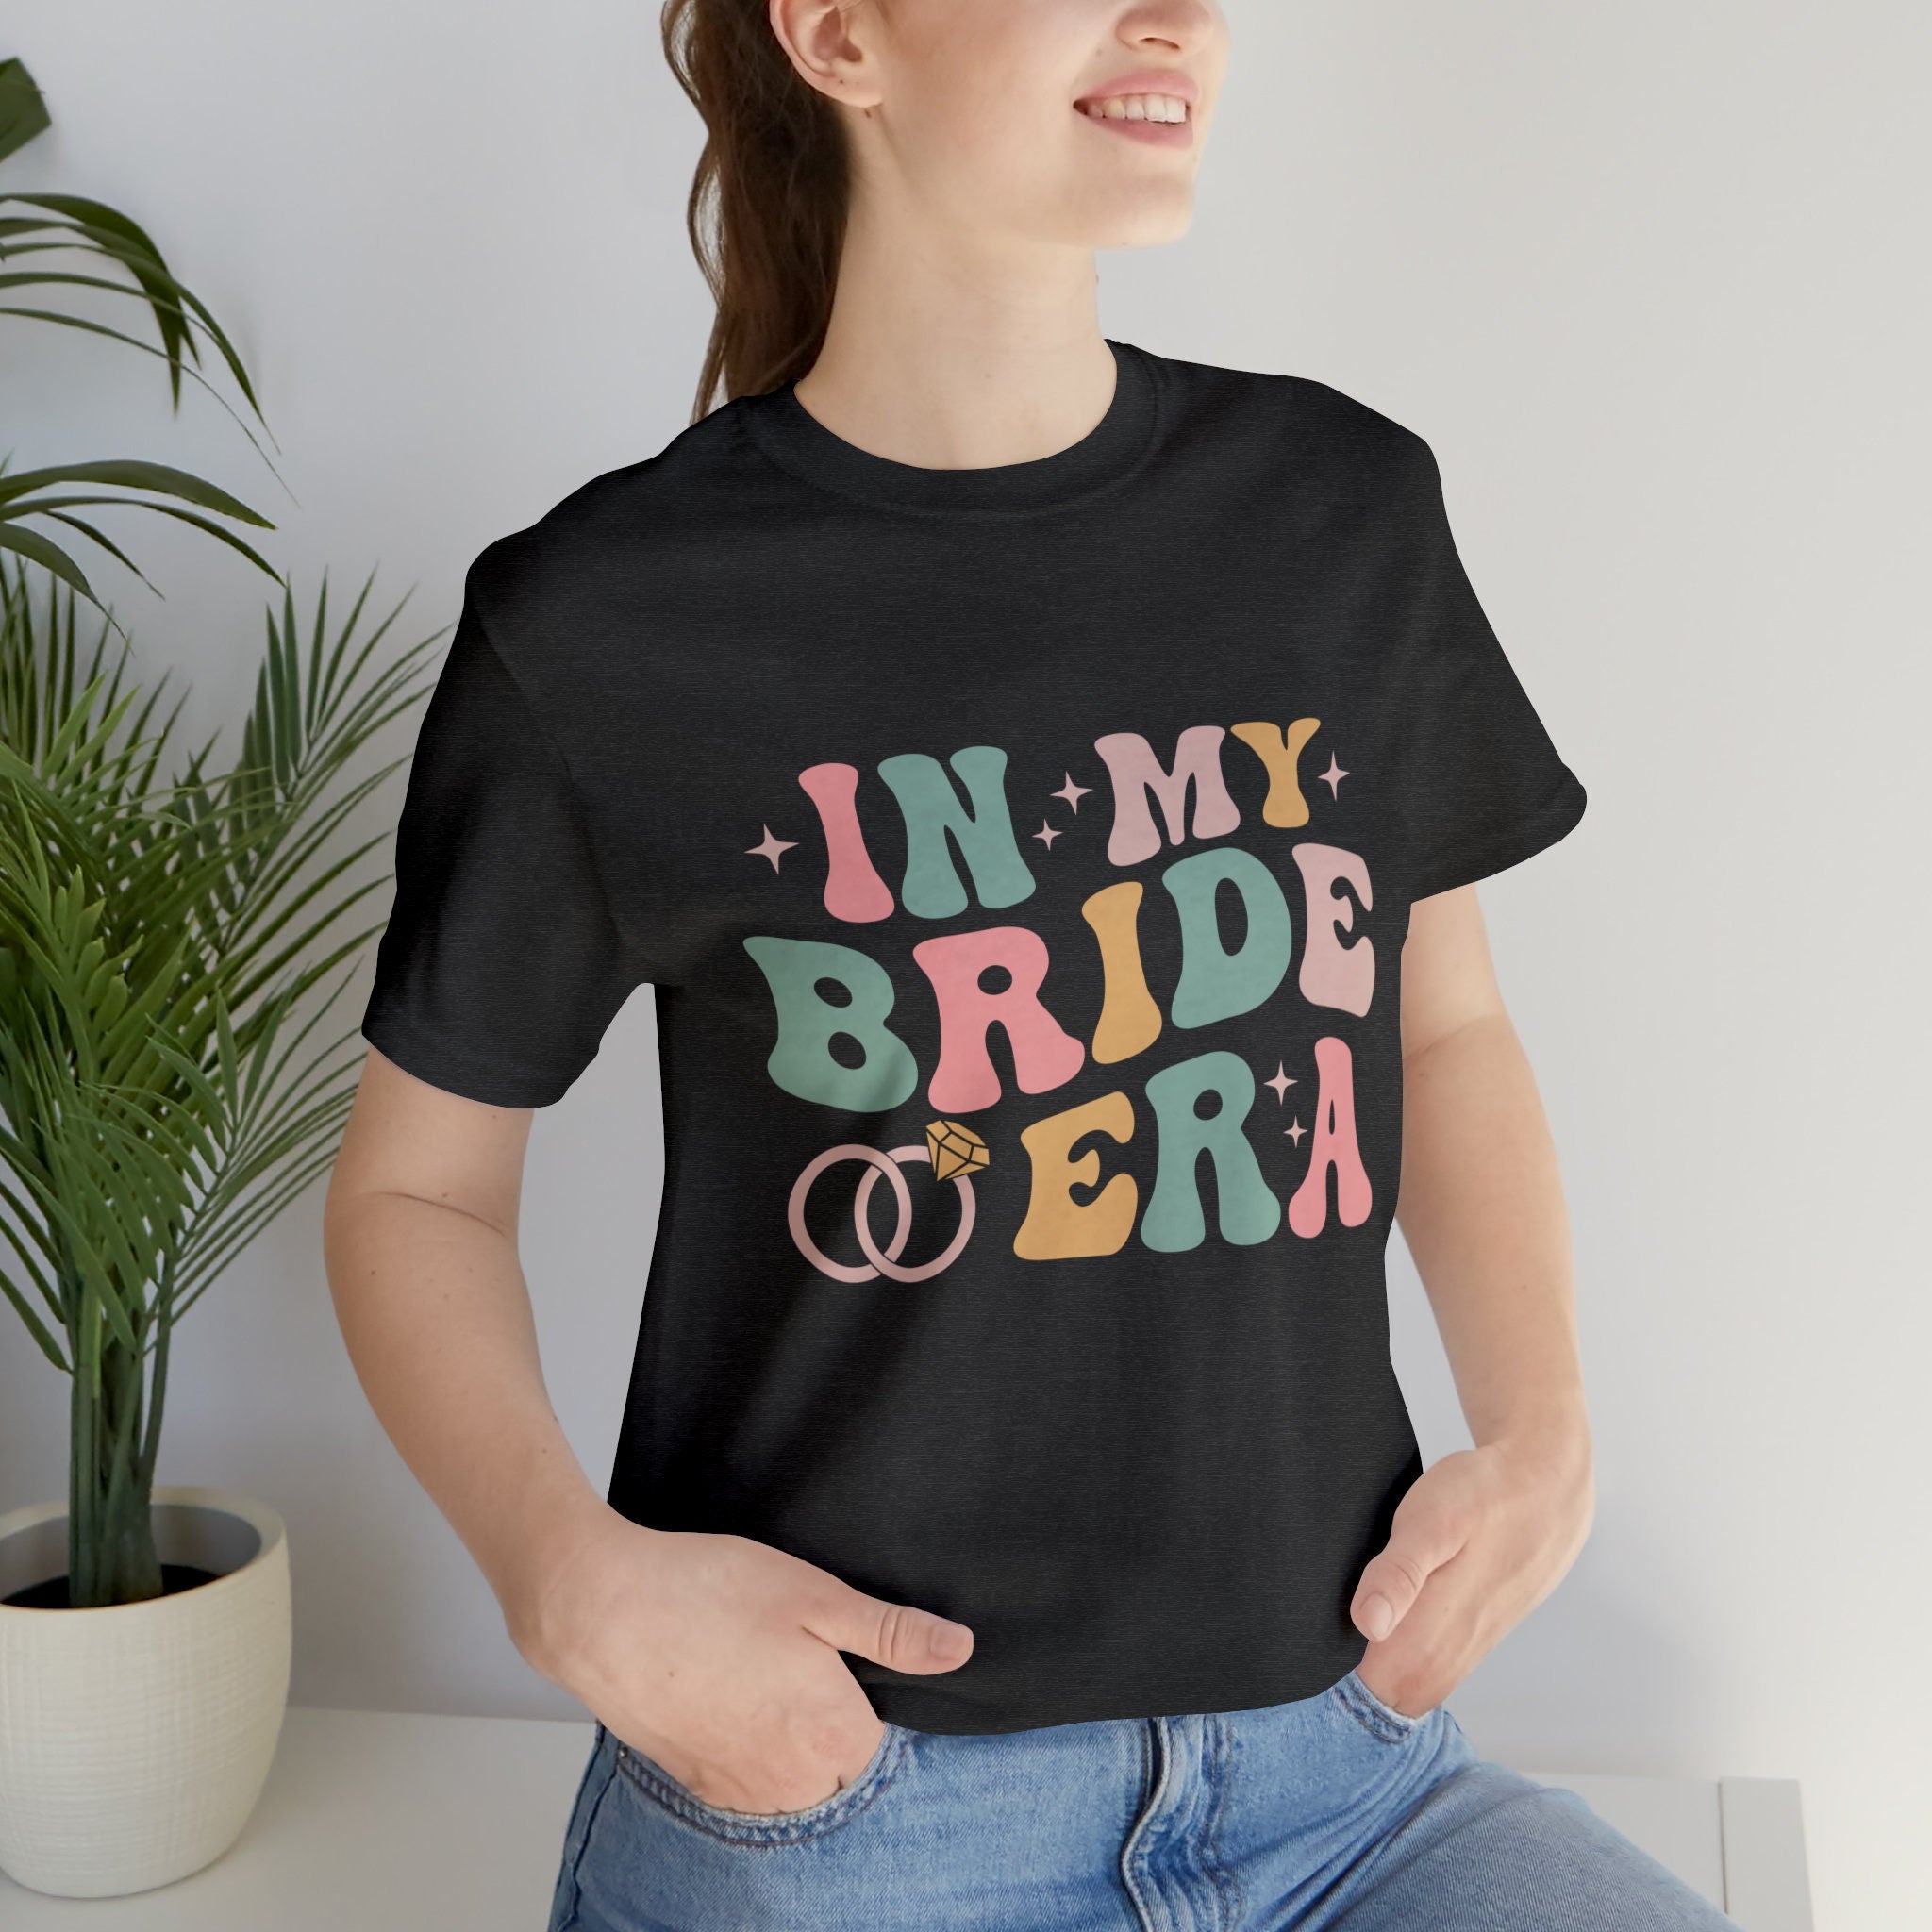 In My Bride Era Short Sleeve Tee, Gift For Bride To Be, Engagement Gift